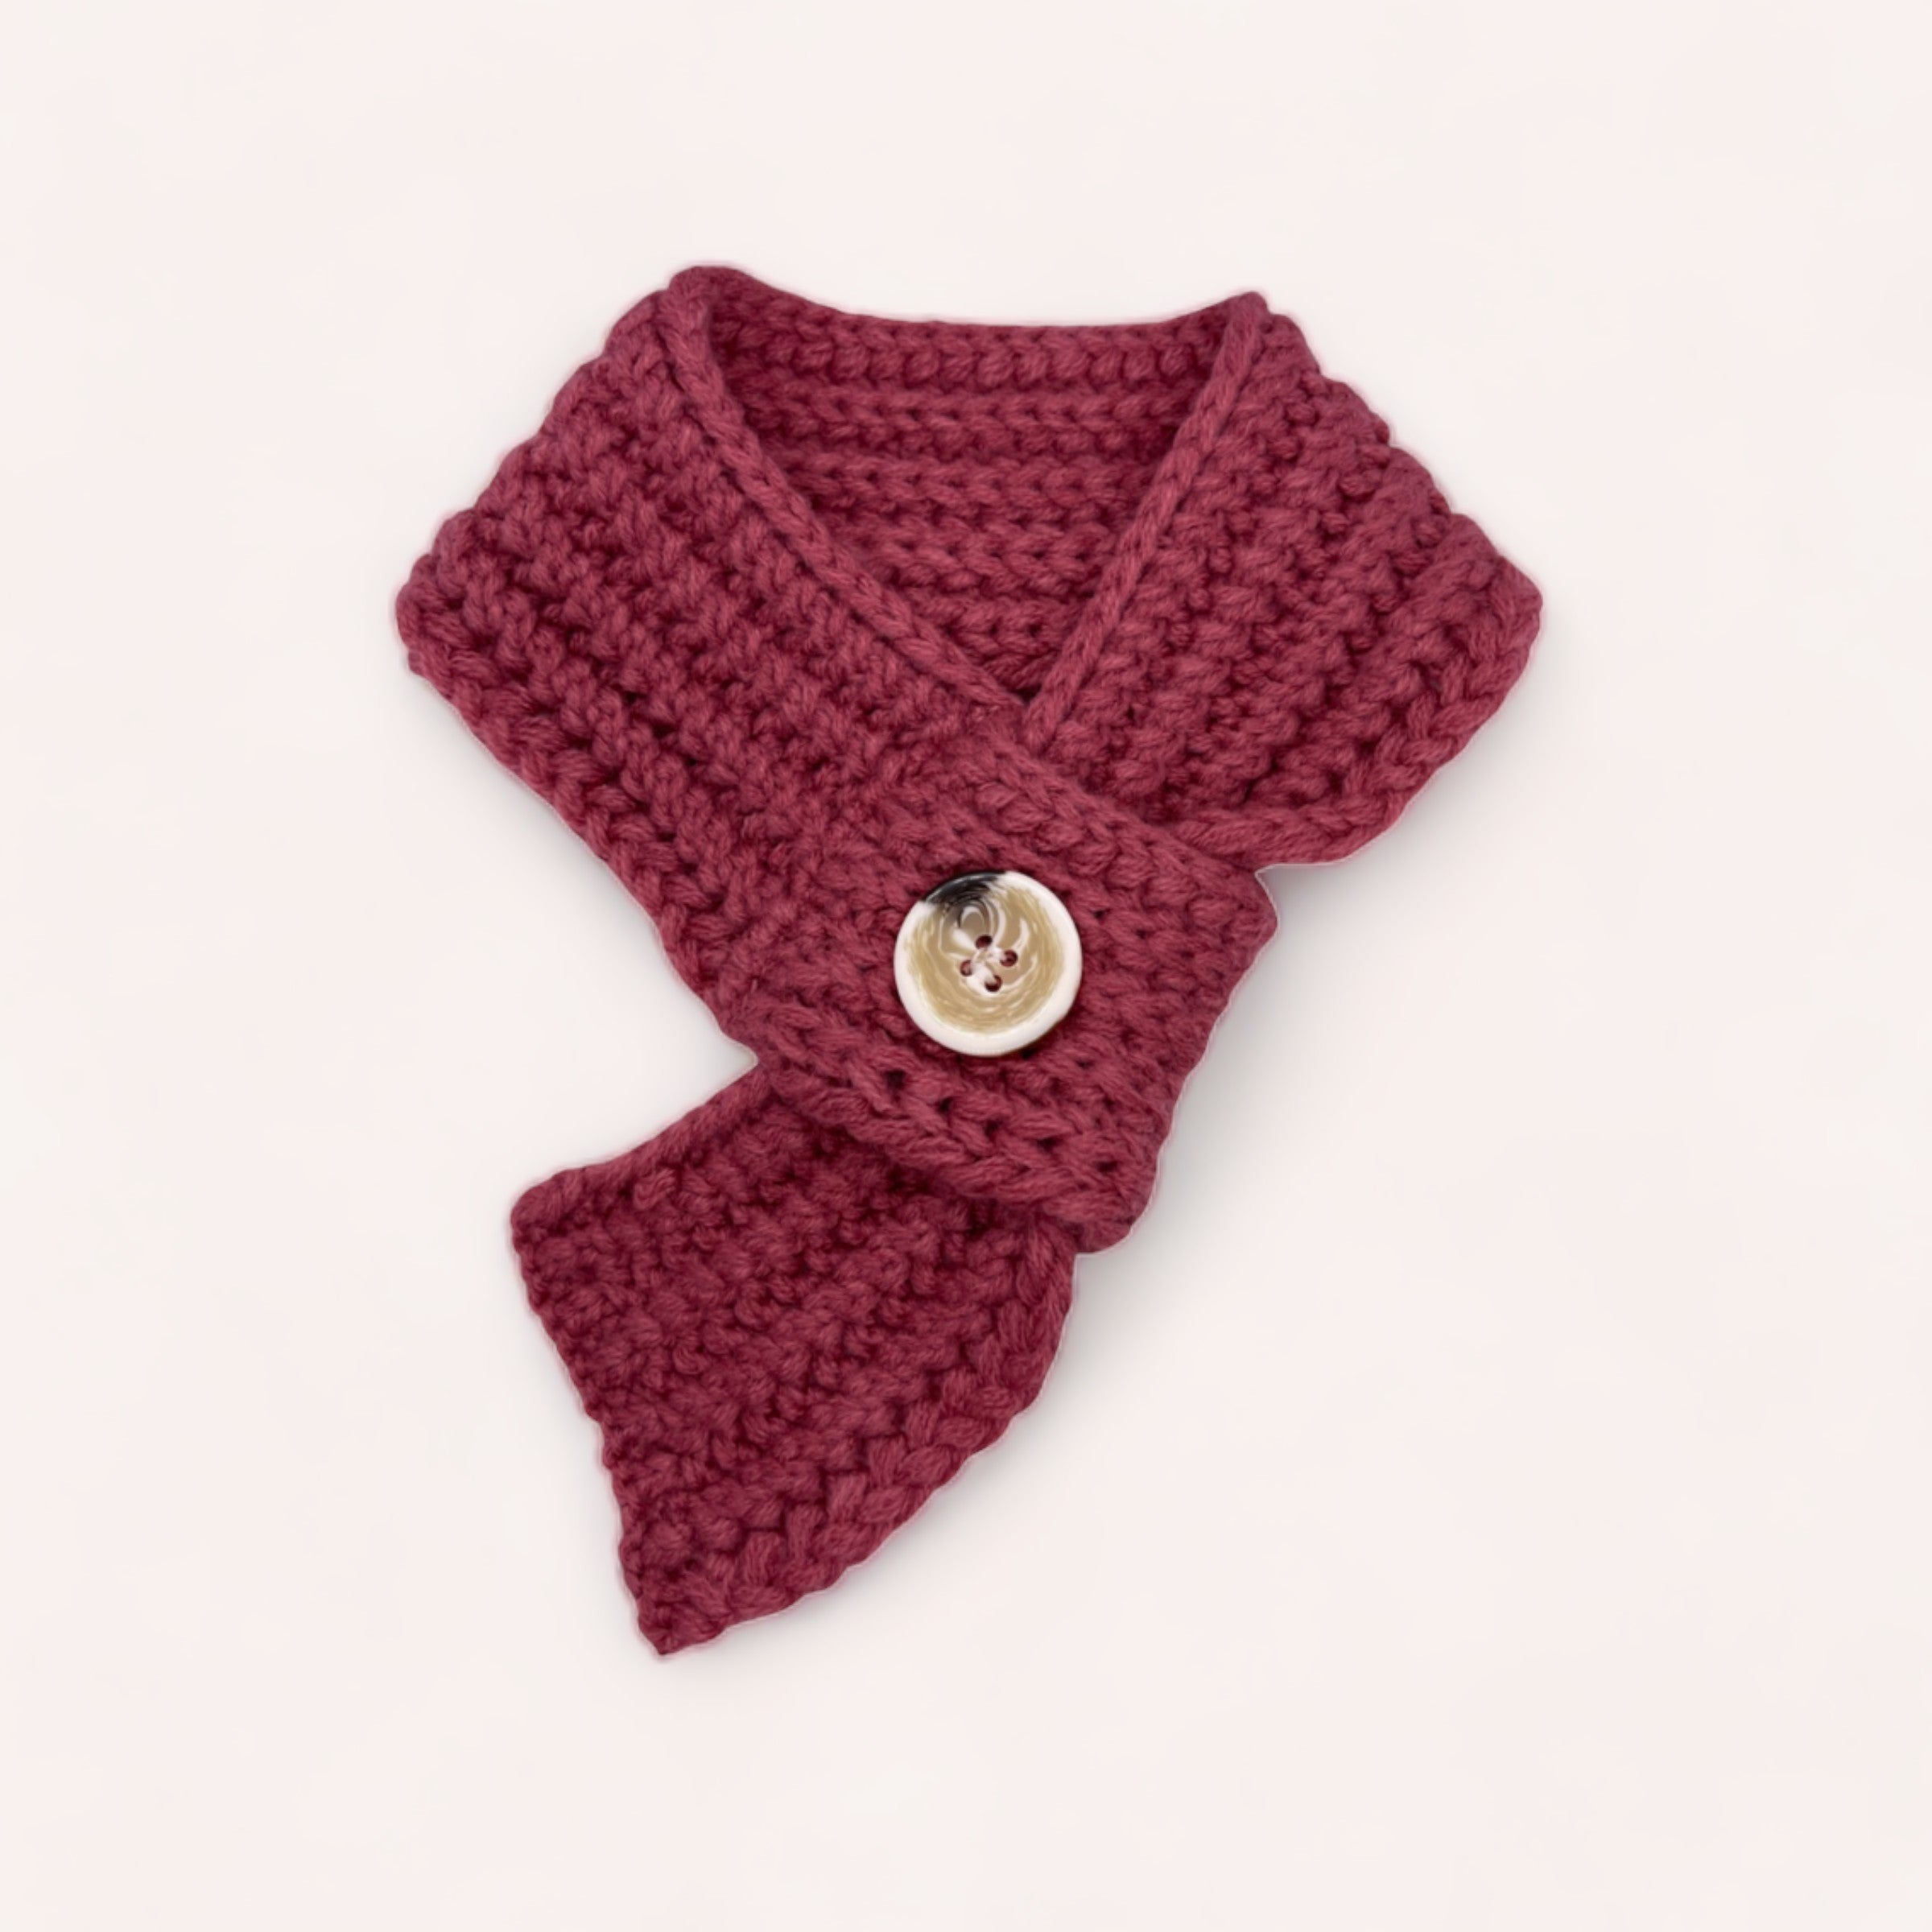 A handcrafted maroon acrylic Pet Scarf with a decorative button laying on a white background, perfect as a pet winter accessory from giftbox co.